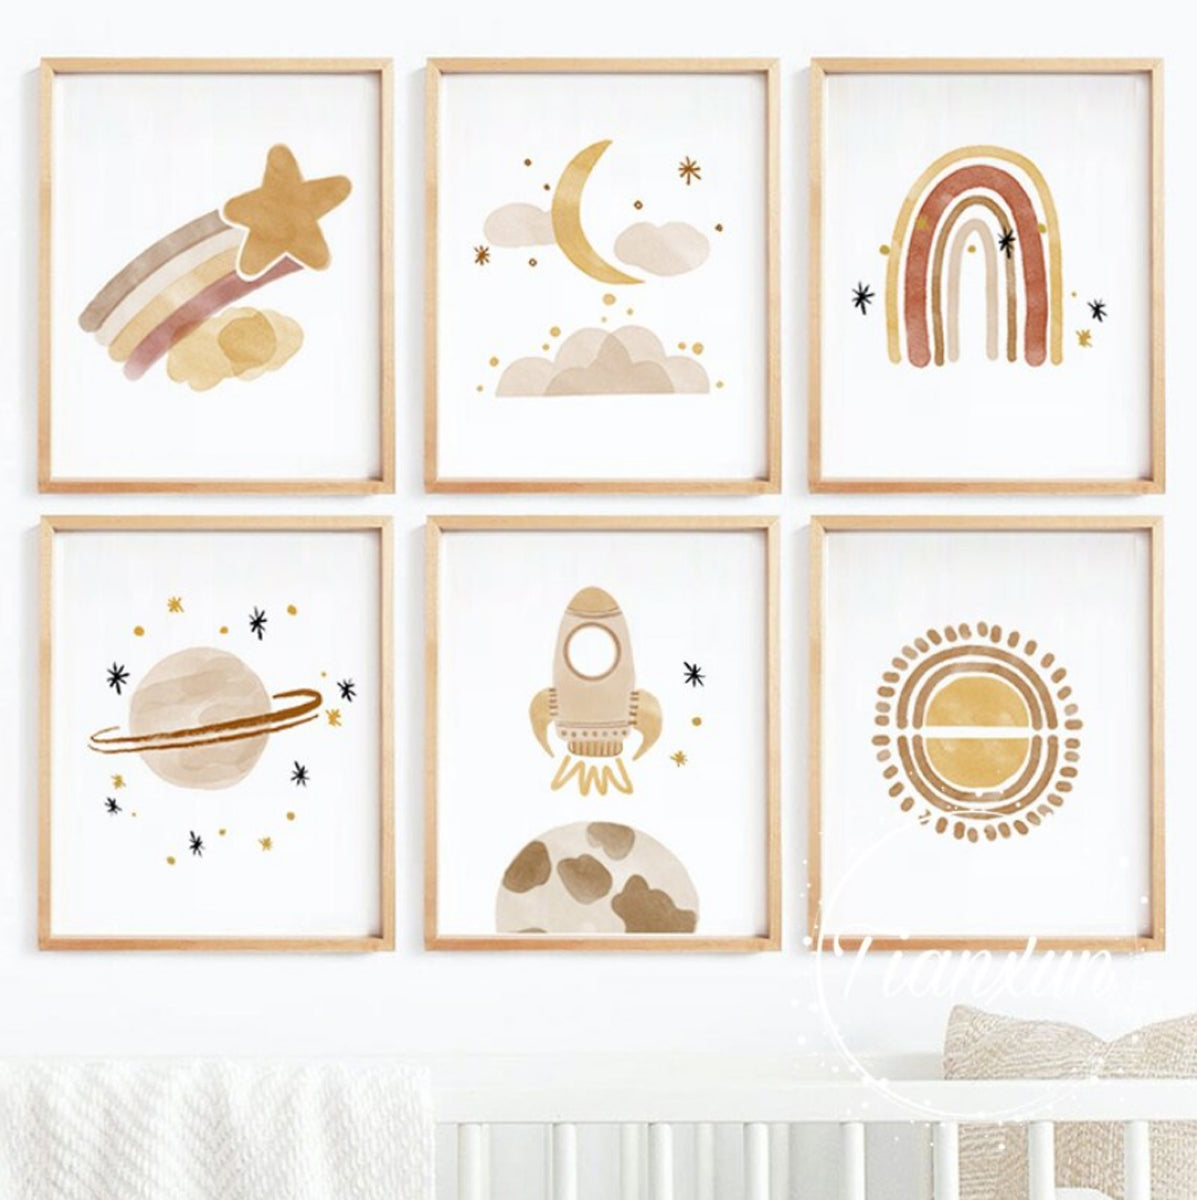 TPFLiving Poster Canvas Planets, Moon Rocket, Astronaut, Stars / Traumpreisfabrik S – and